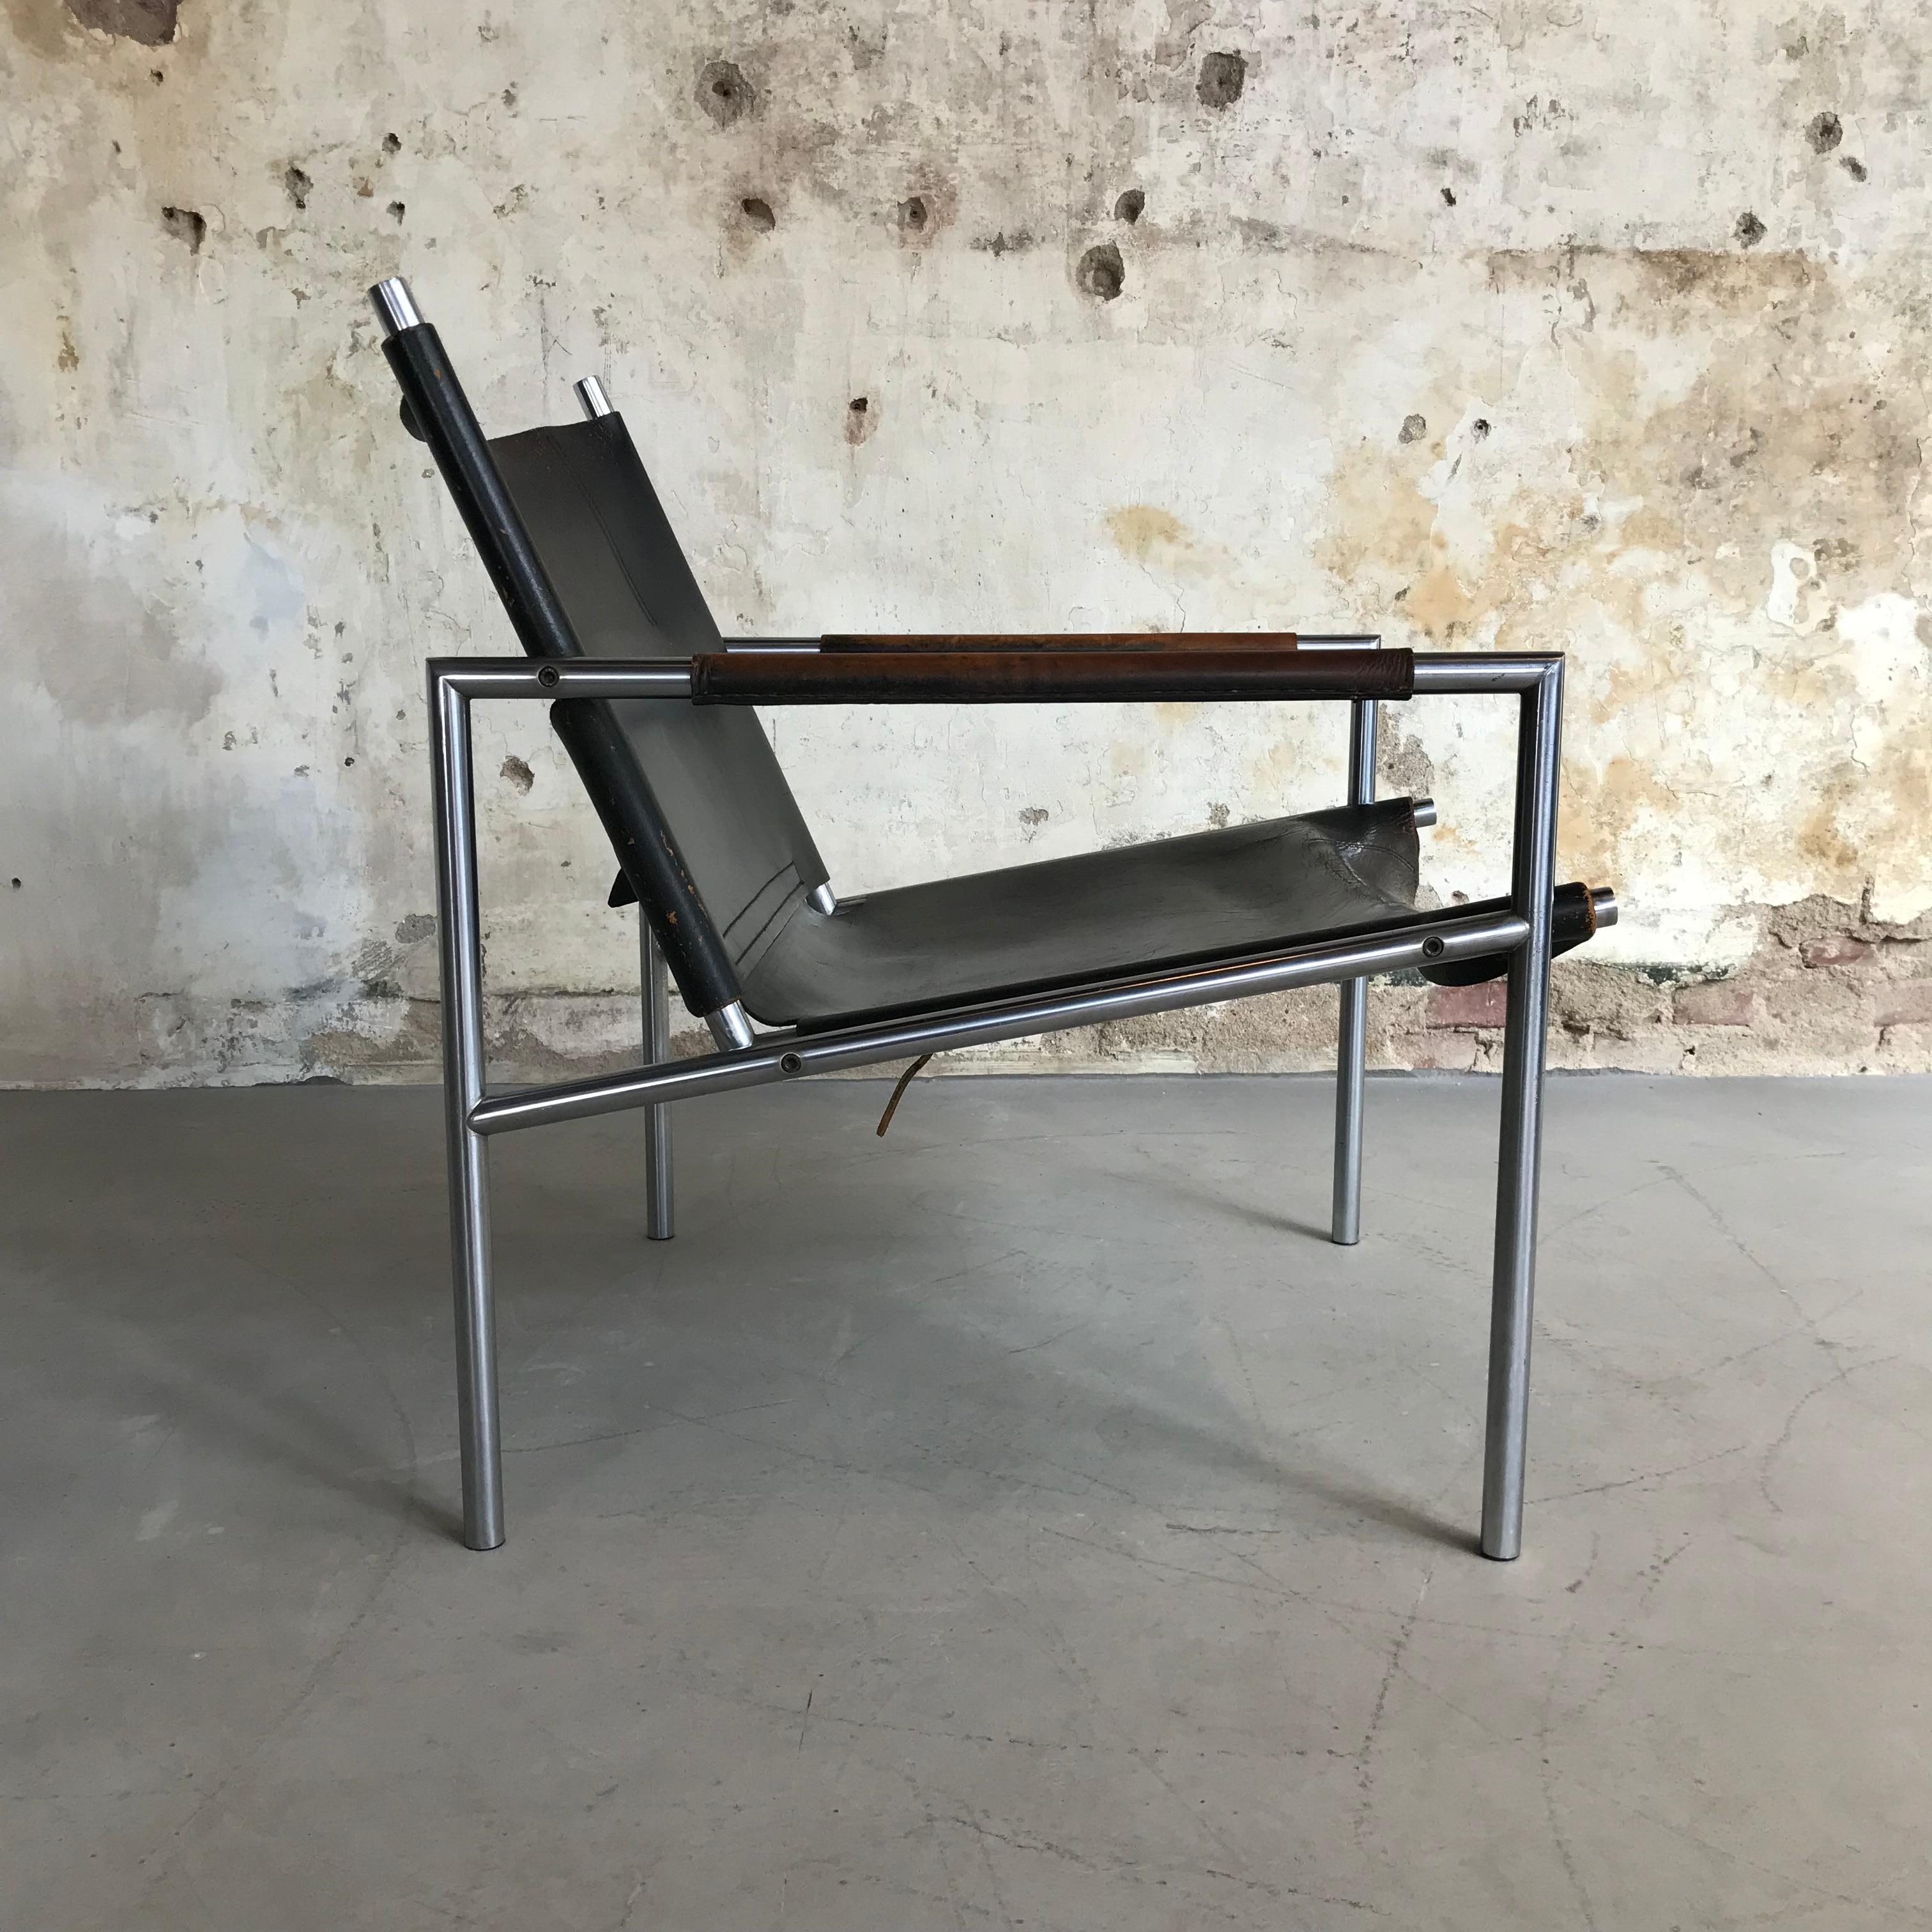 Beautiful and well-known easychair/armchair designed by the Dutch designer Martin Visser in 1960 and produced by ‘t Spectrum, The Netherlands. Features a tubular brushed metal frame, seat, back- and armrests in amazing patinated black leather. A